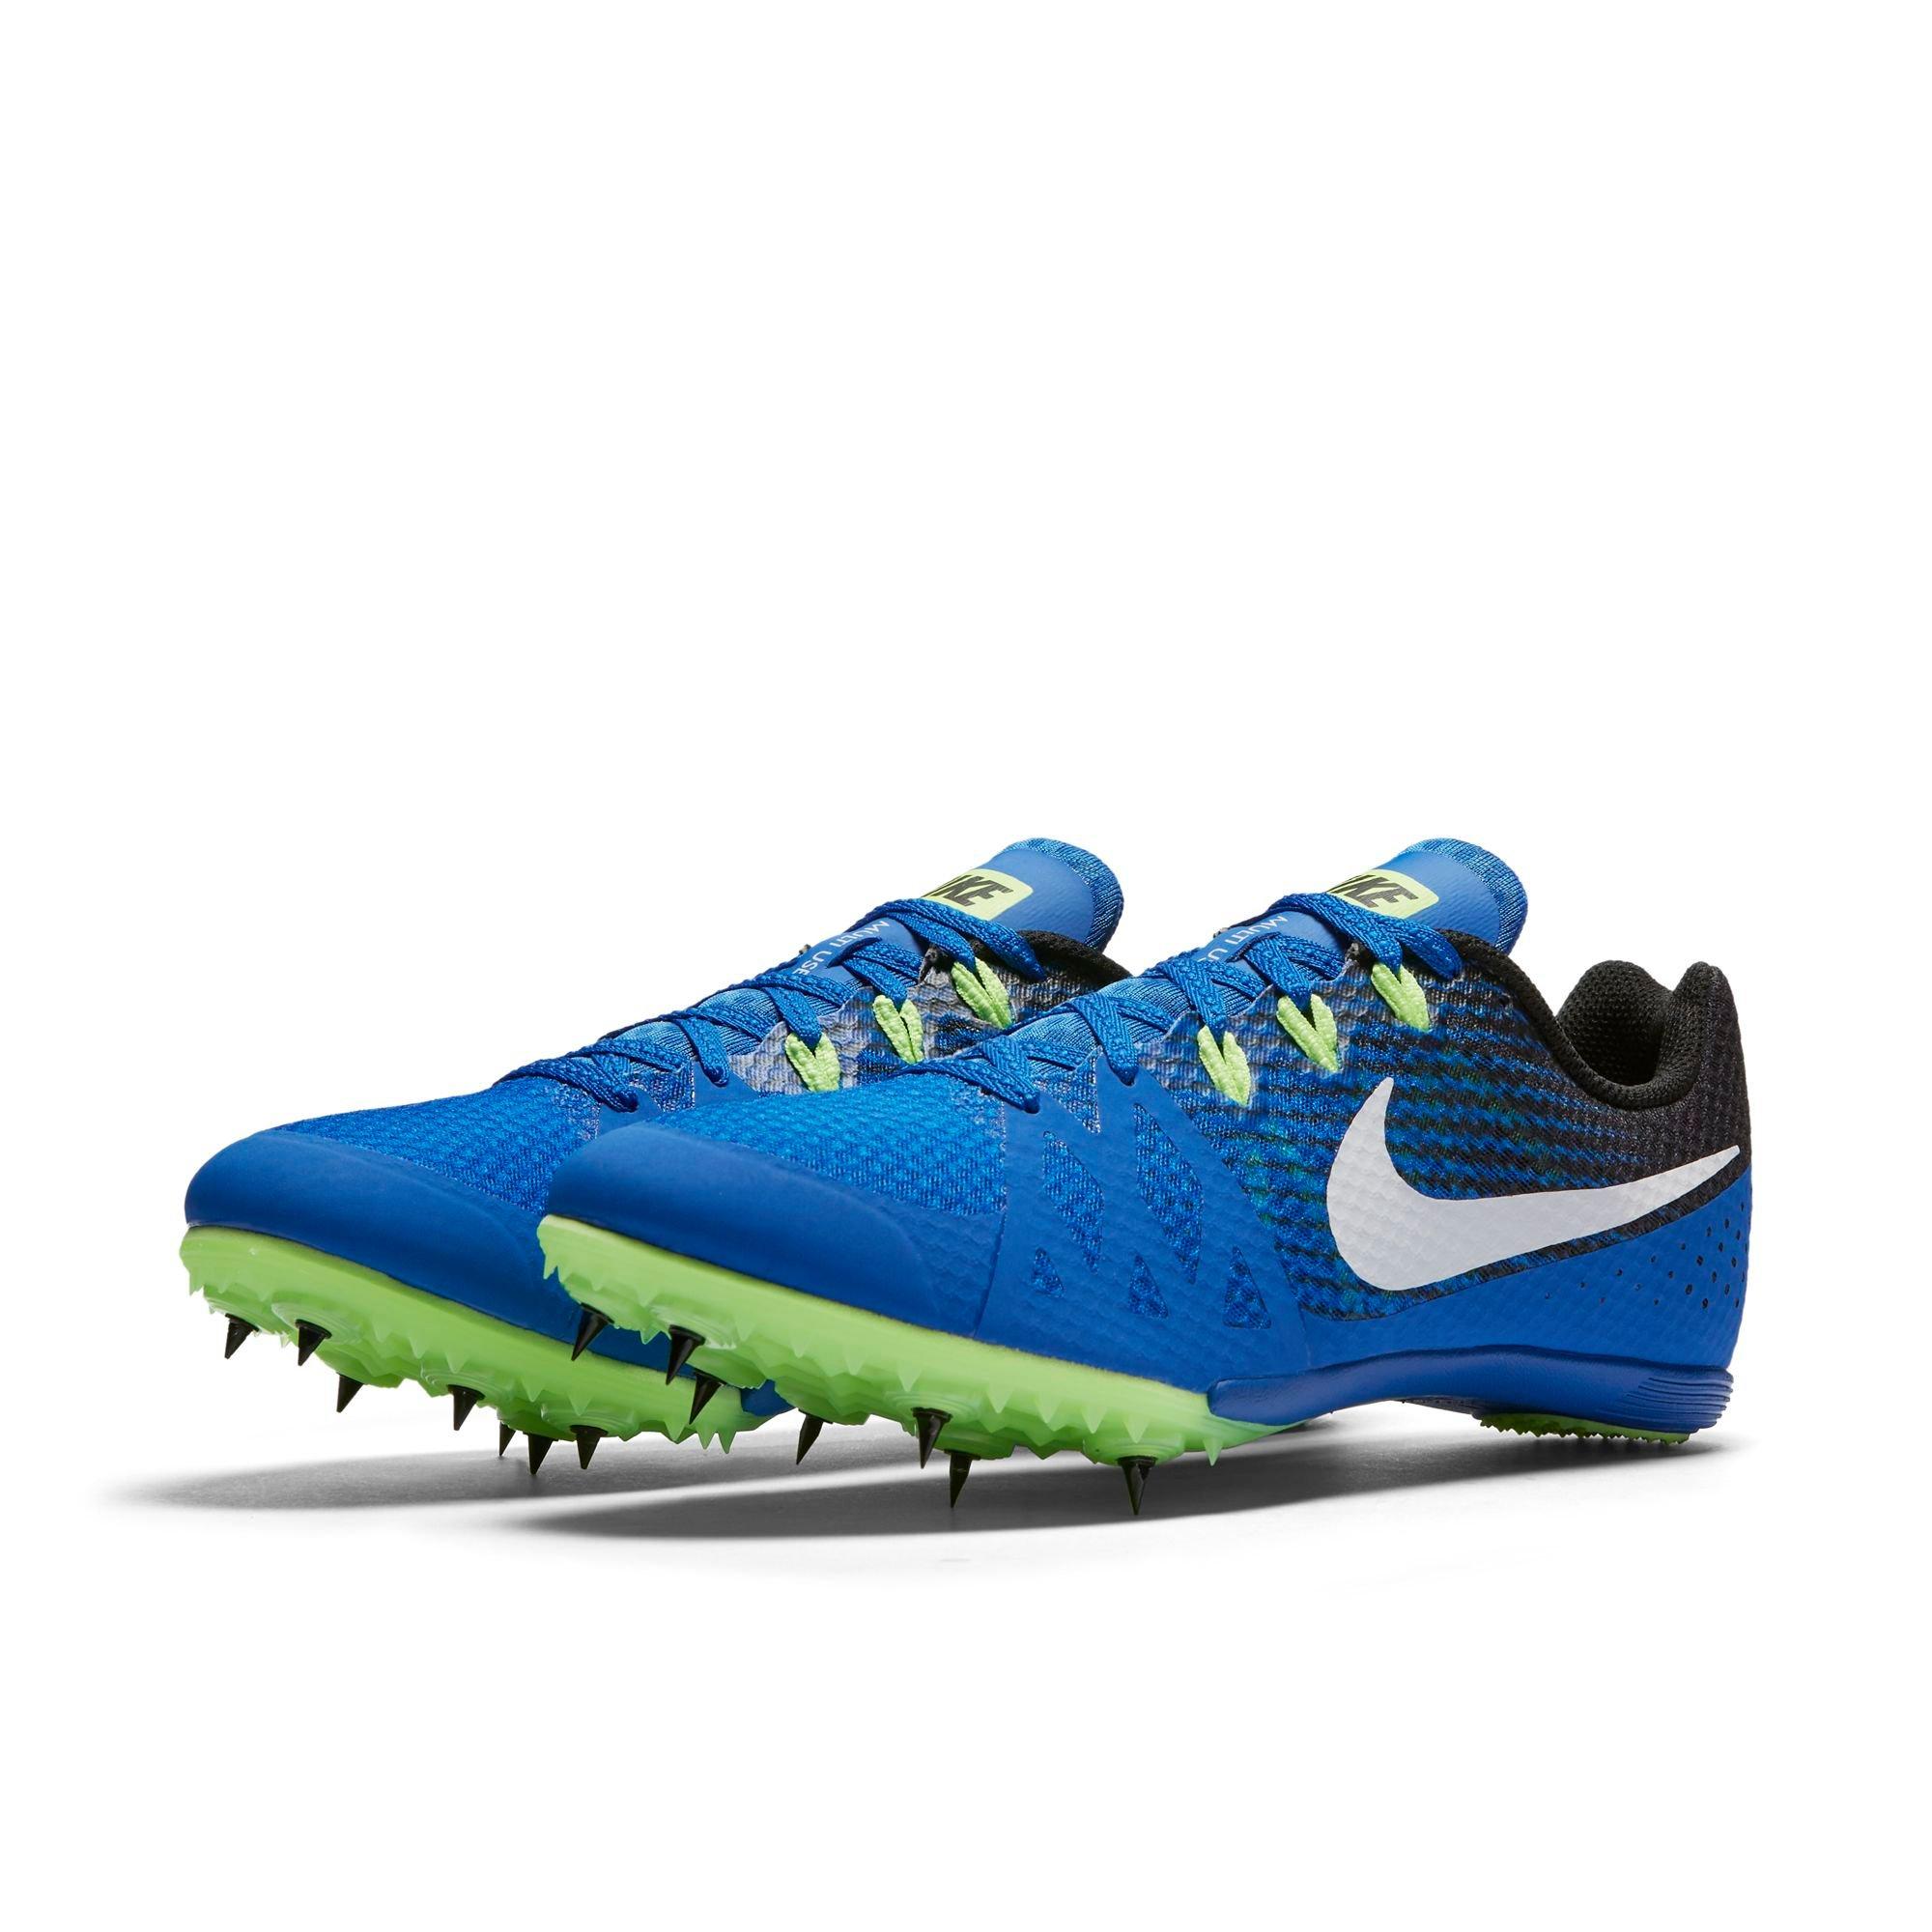 blue and white track spikes